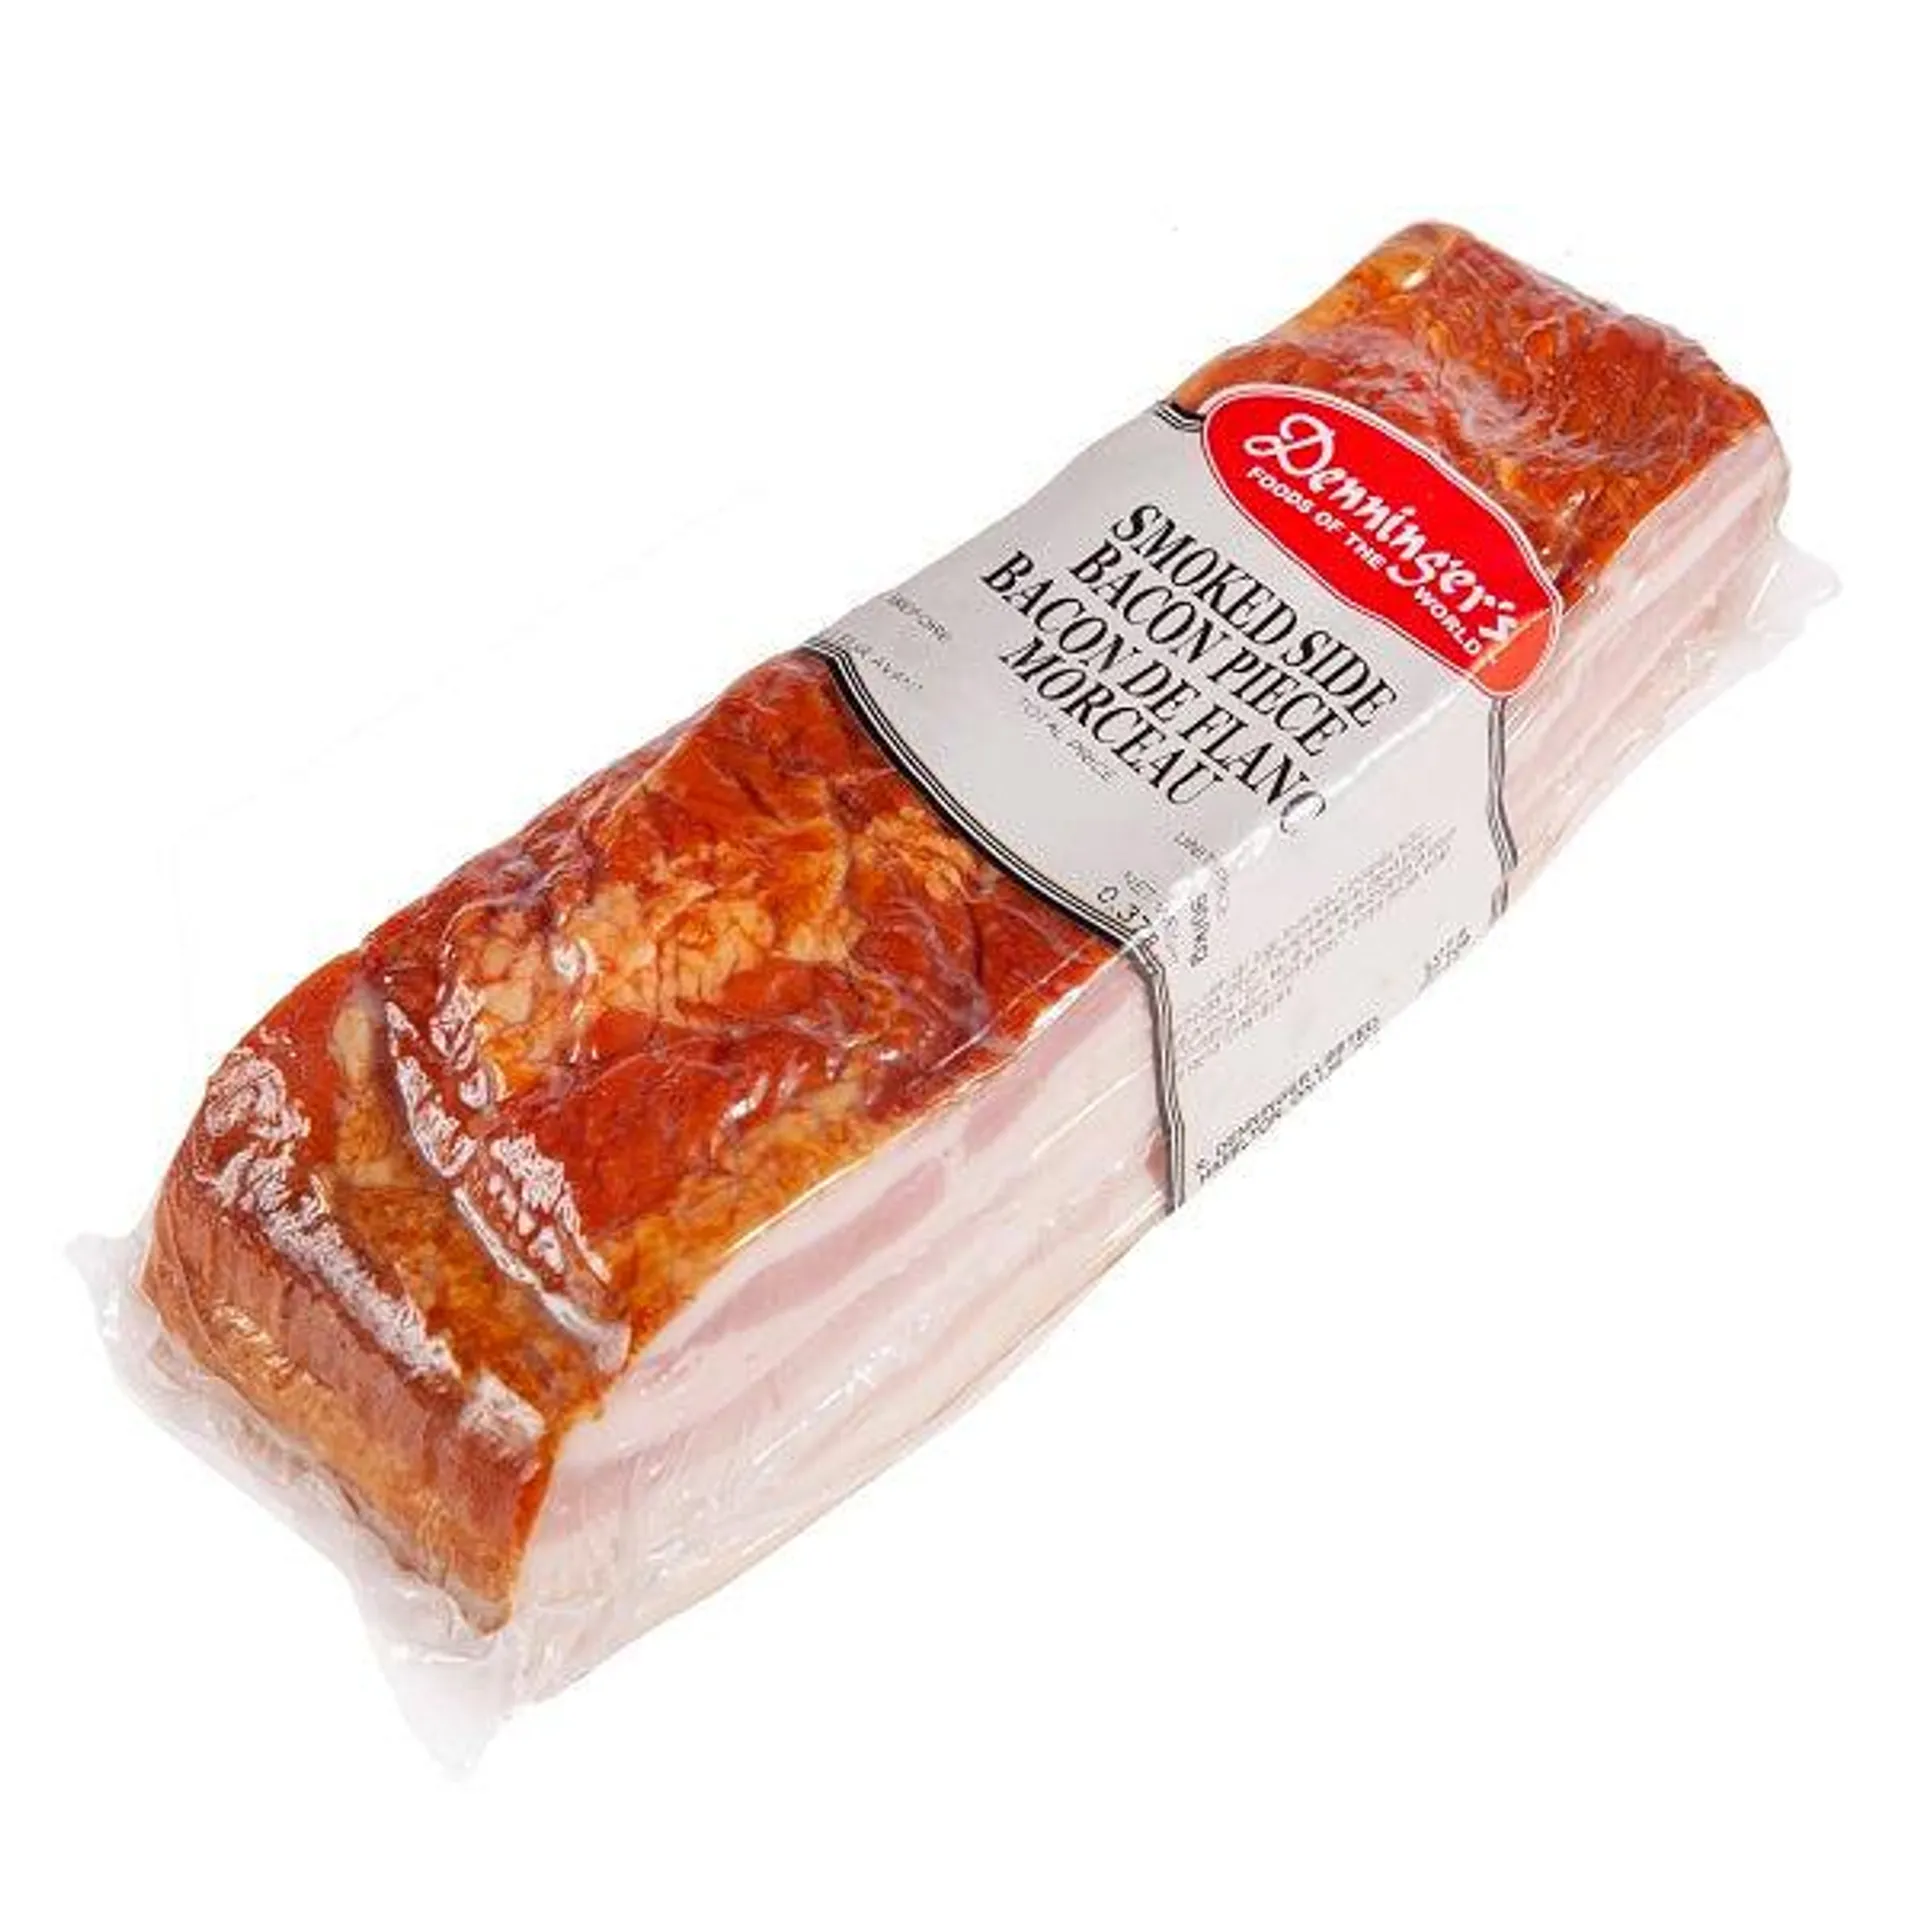 Smoked Side Bacon Slab - 300 g